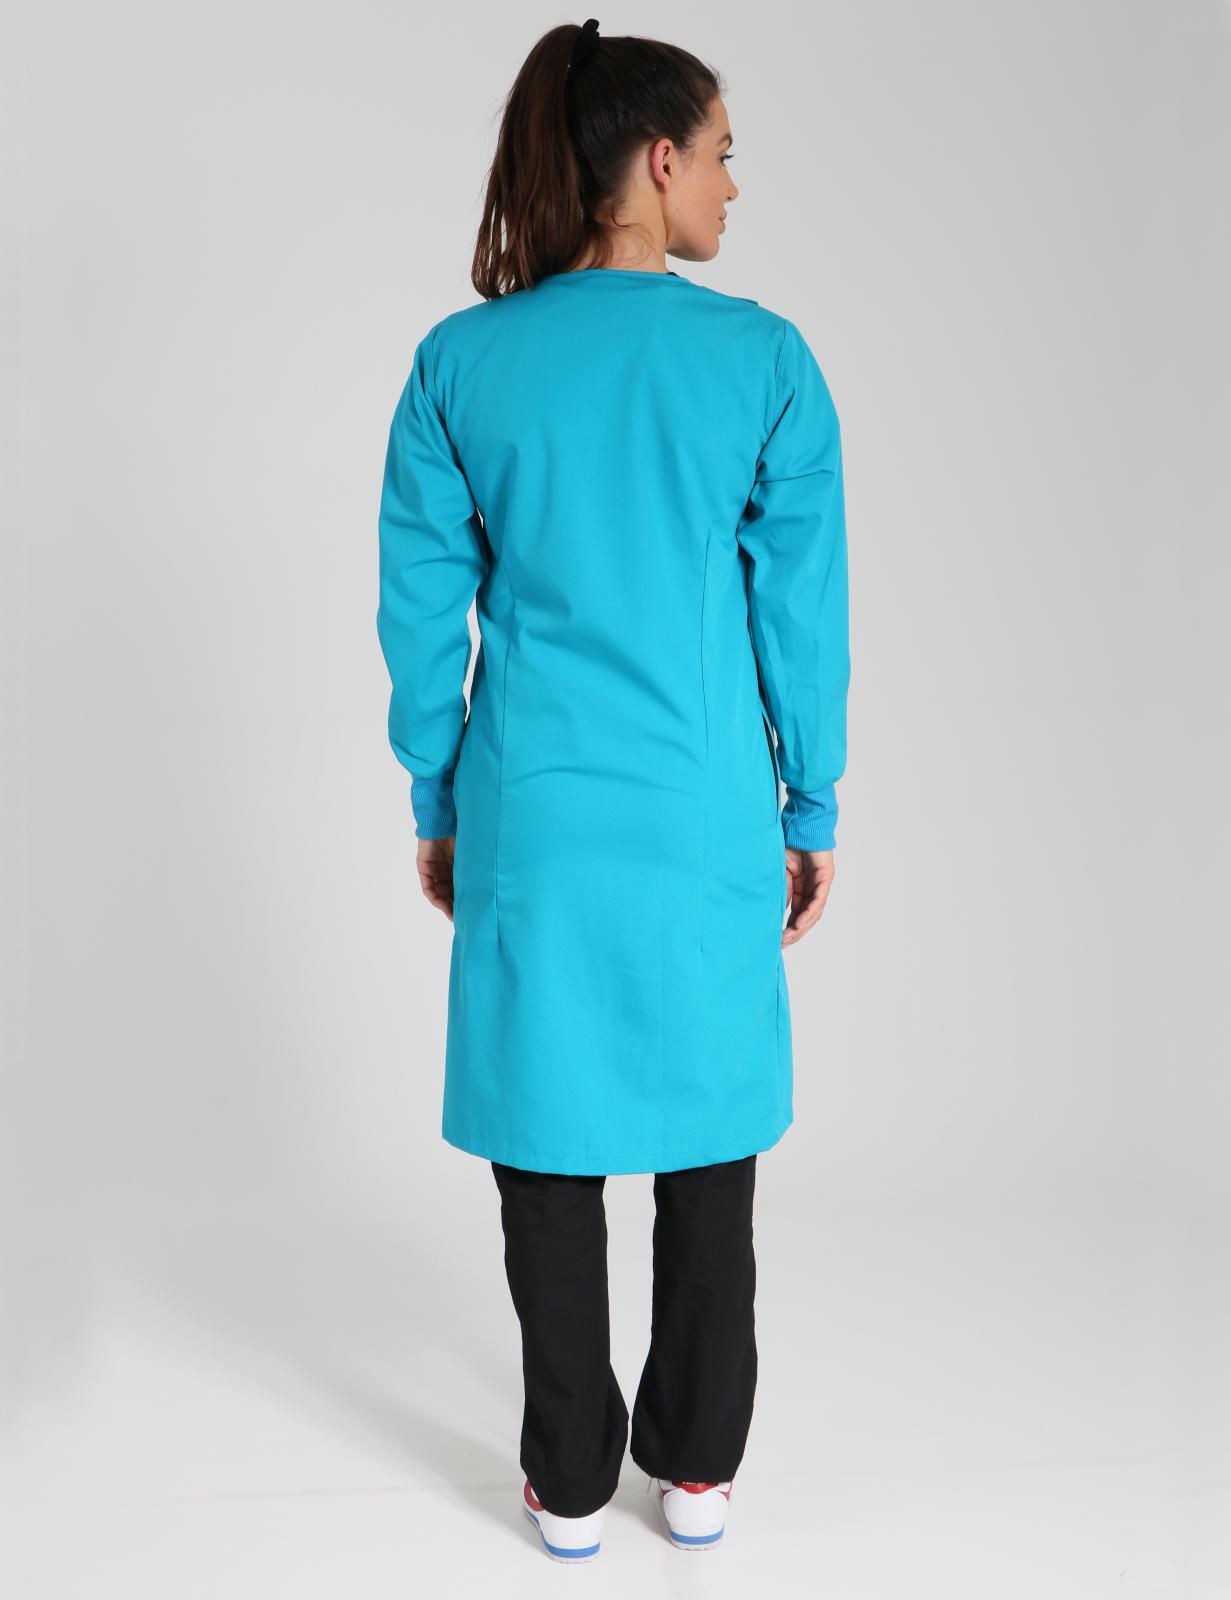 Side Opening Lab Coat - Teal - Small - 2